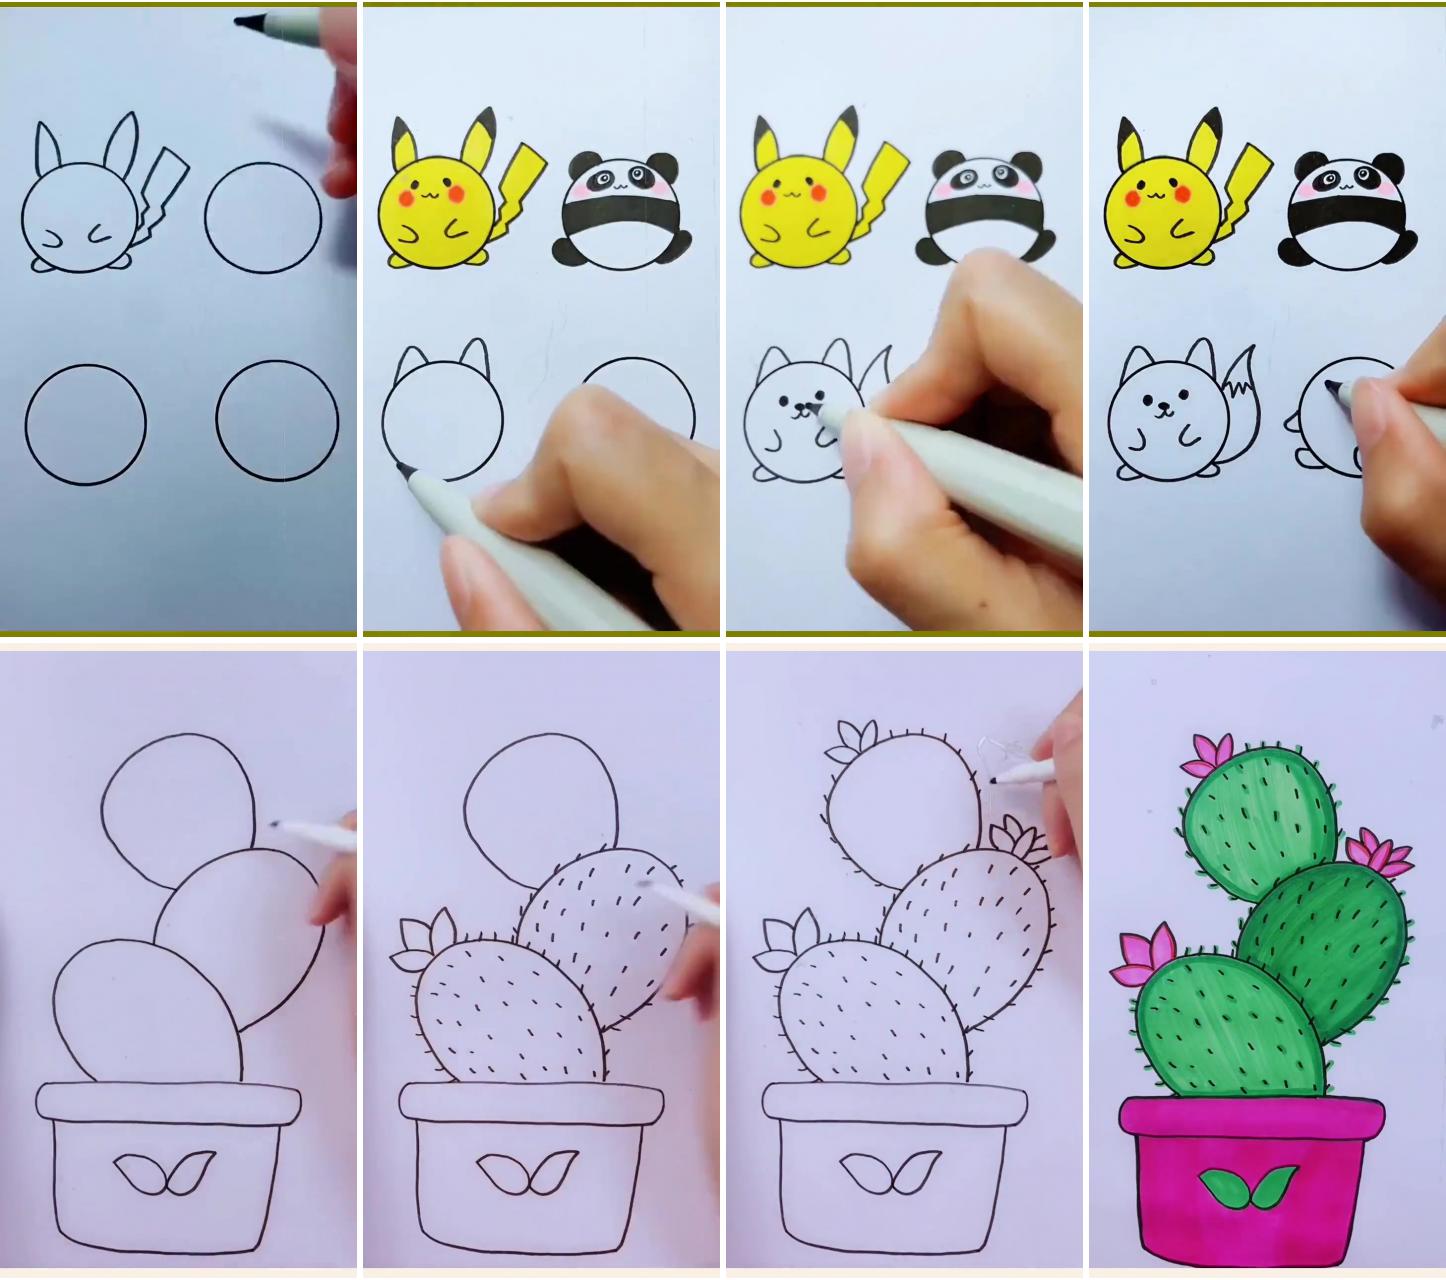 How to draw animals step by step - learn how to draw | the ultimate guide on how to draw cactus